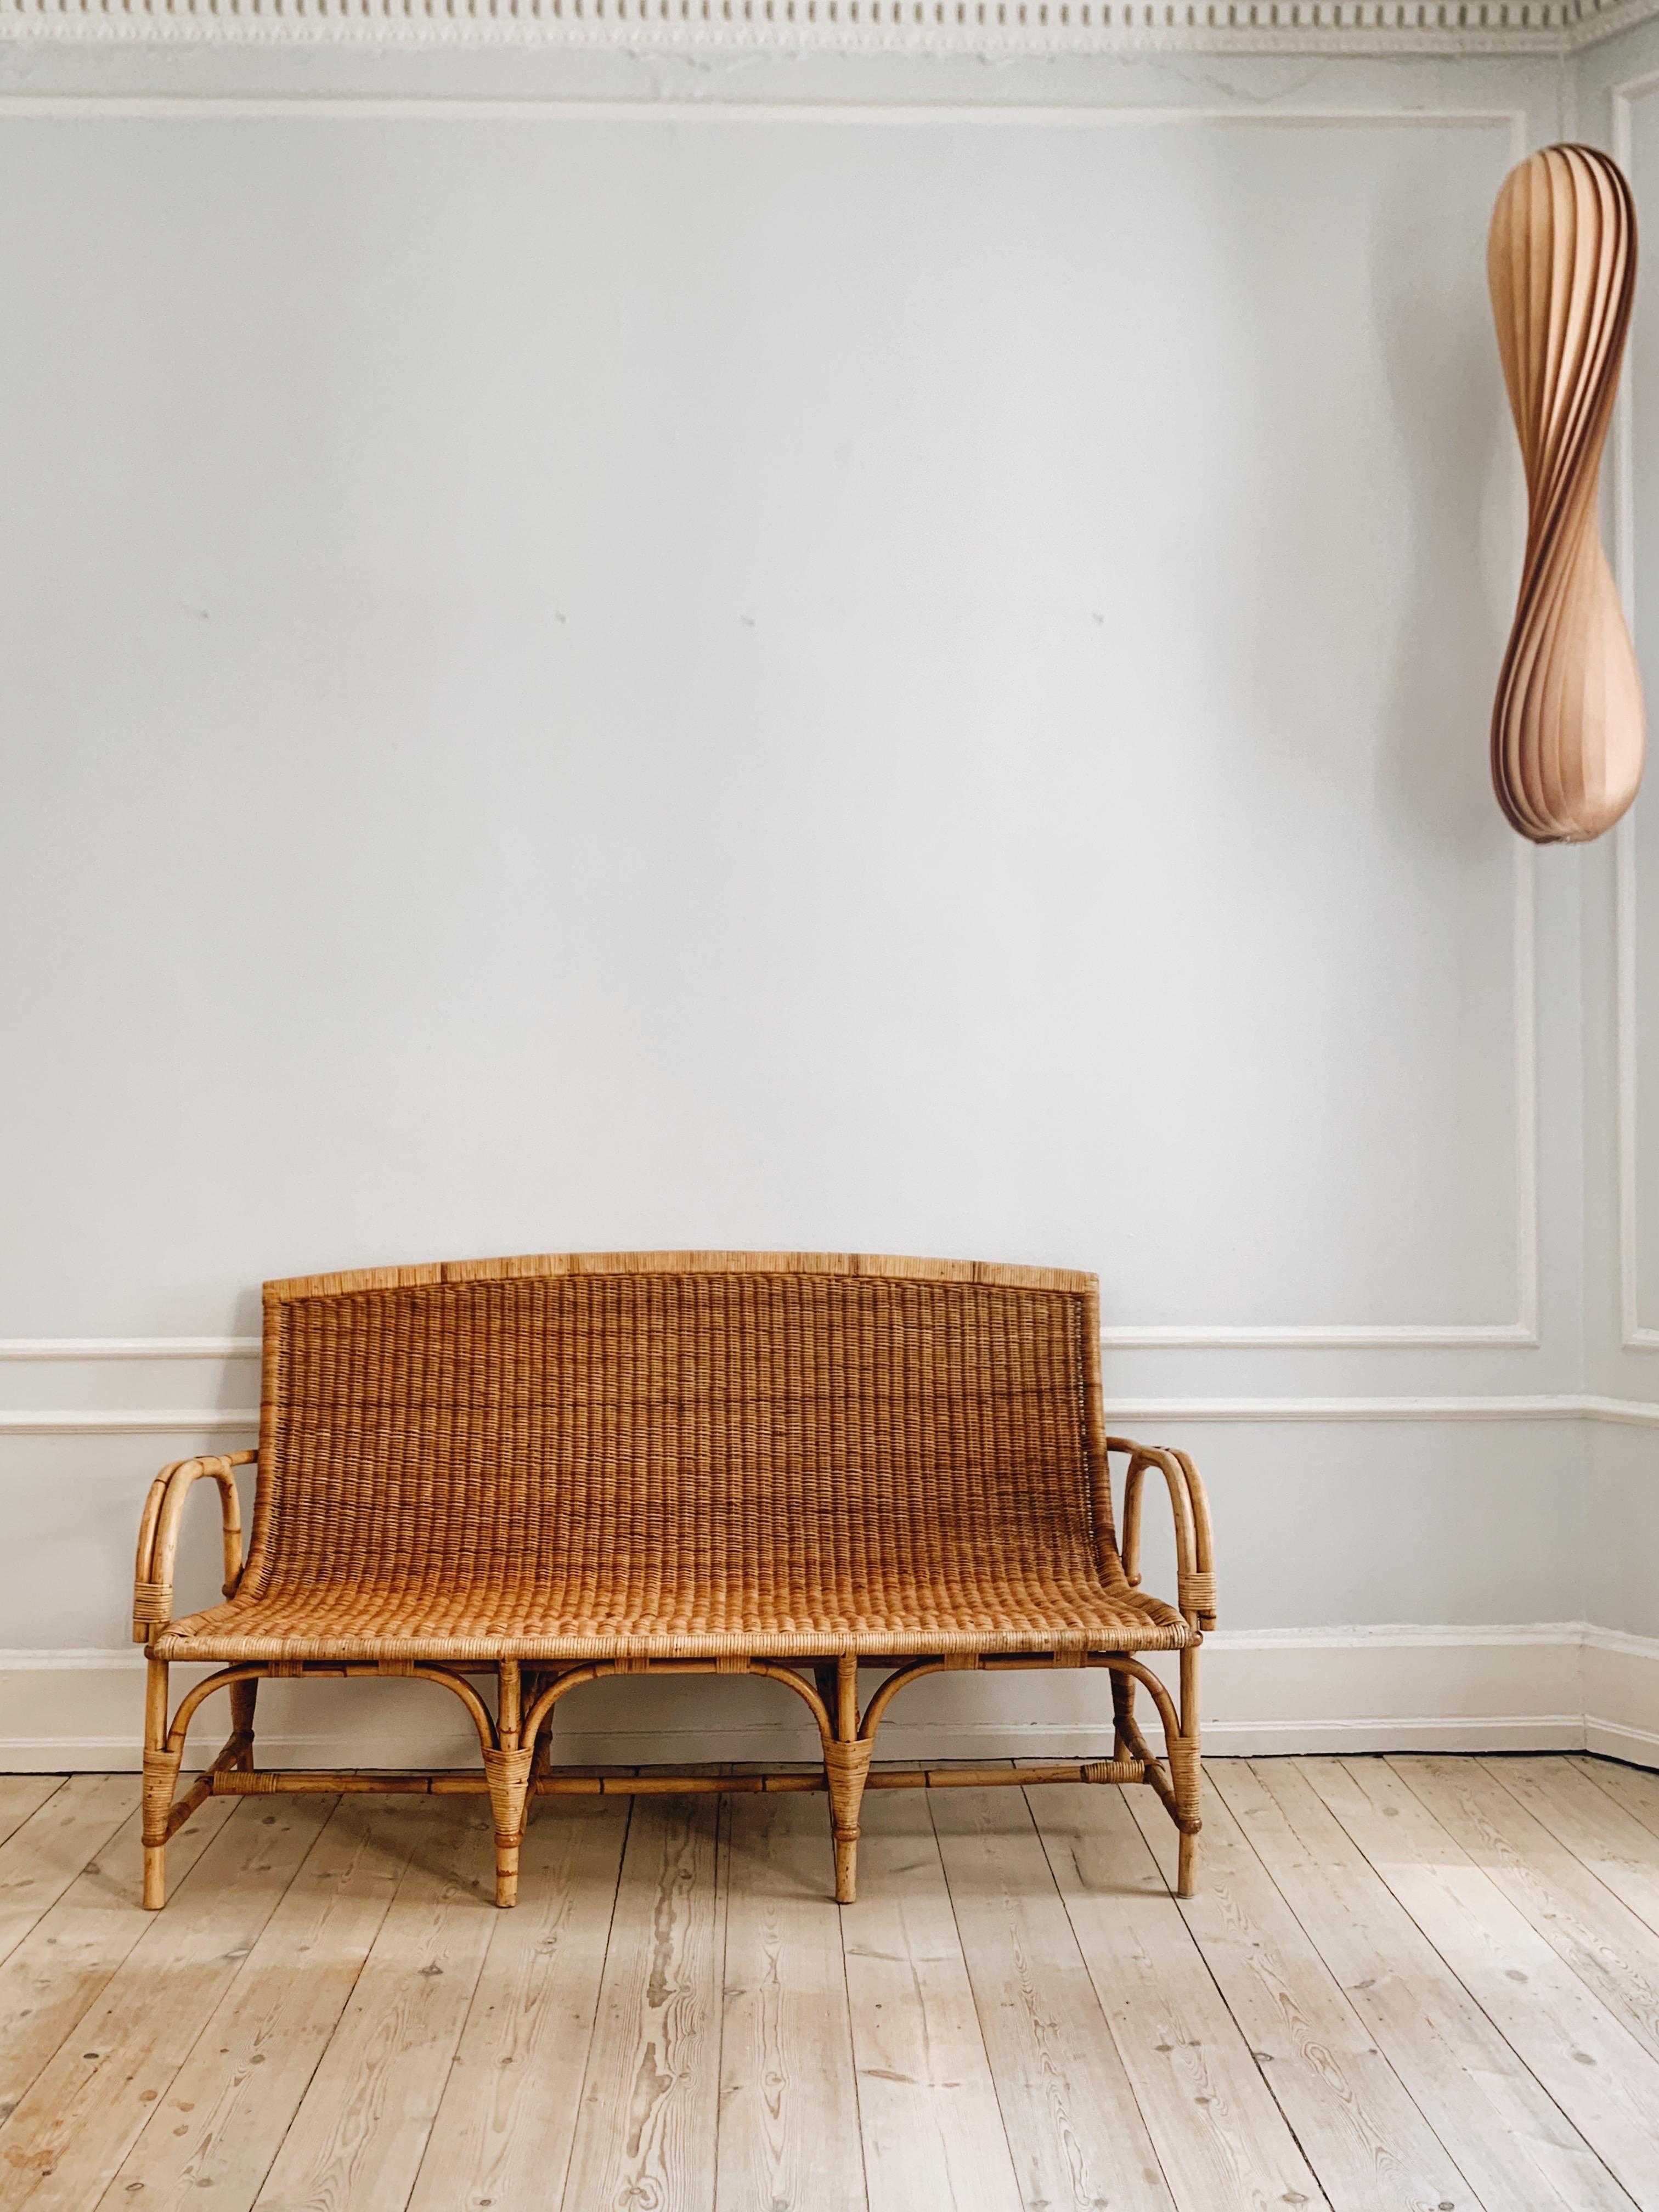 

This wicker bench is made by the old Danish basket makers and bears witness to top-class craftsmanship. A craft and furniture tradition that no longer exists. 

The is attributed to Robert Wengler, who was the finest basket maker in old